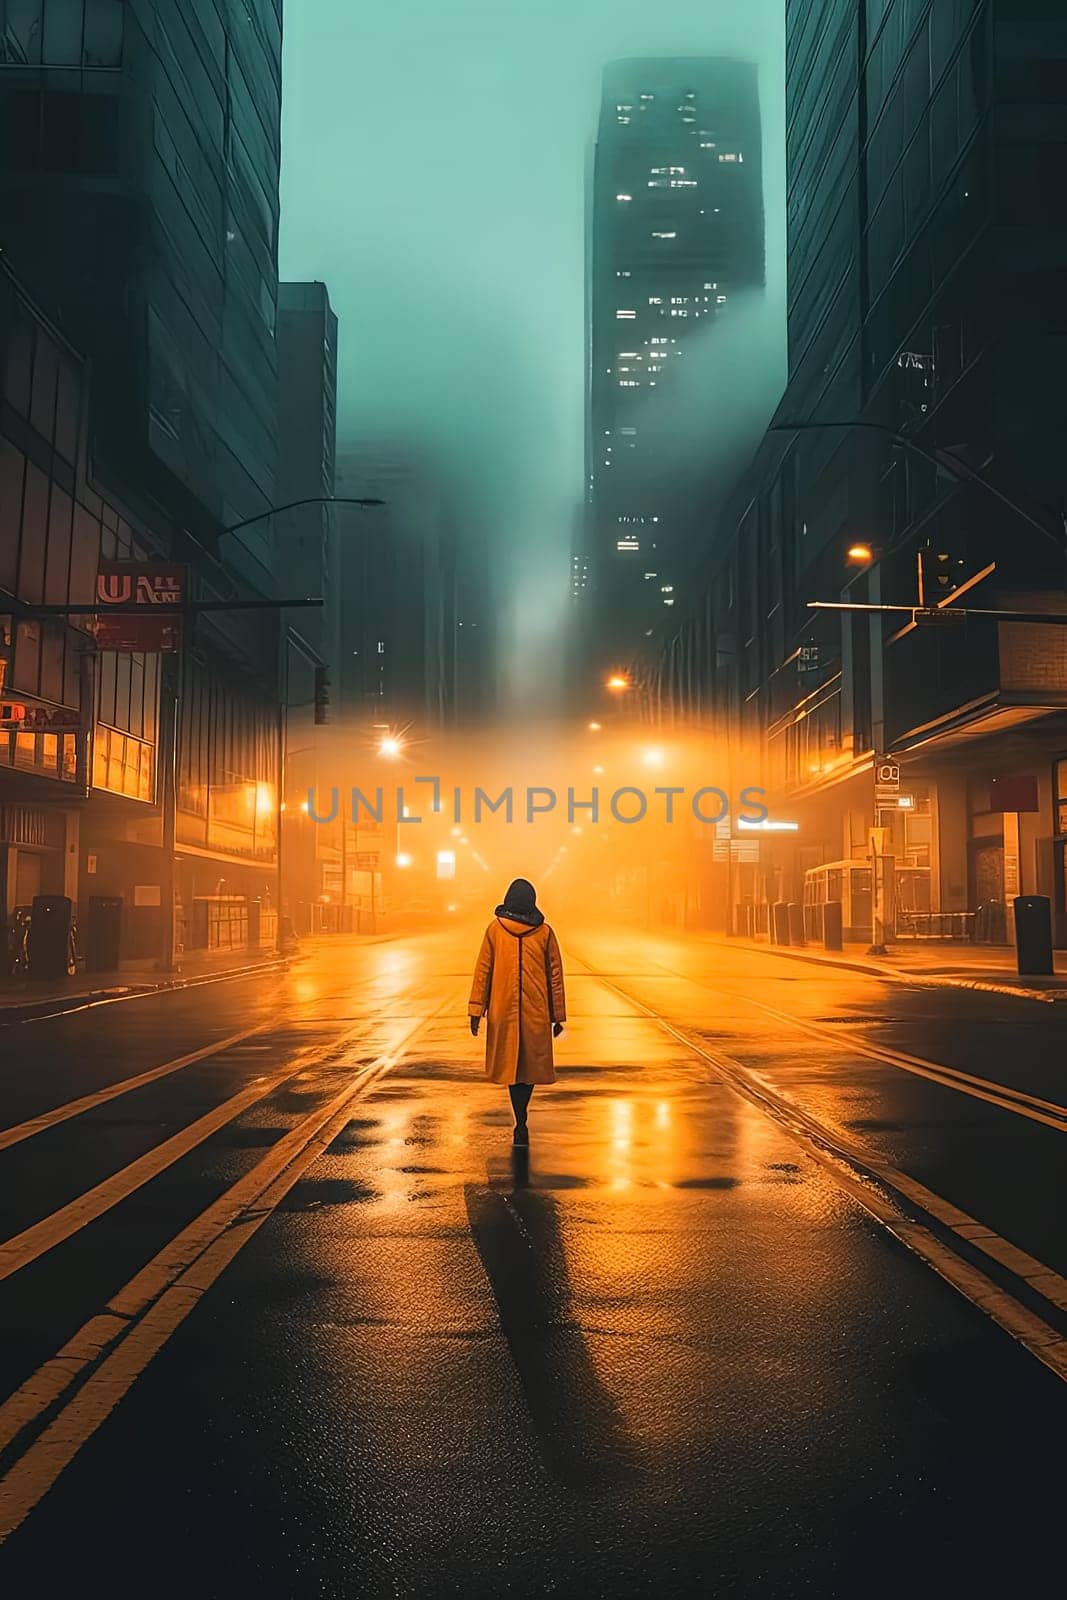 A woman walks down a city street at night. The street is wet and the lights are on, creating a moody atmosphere